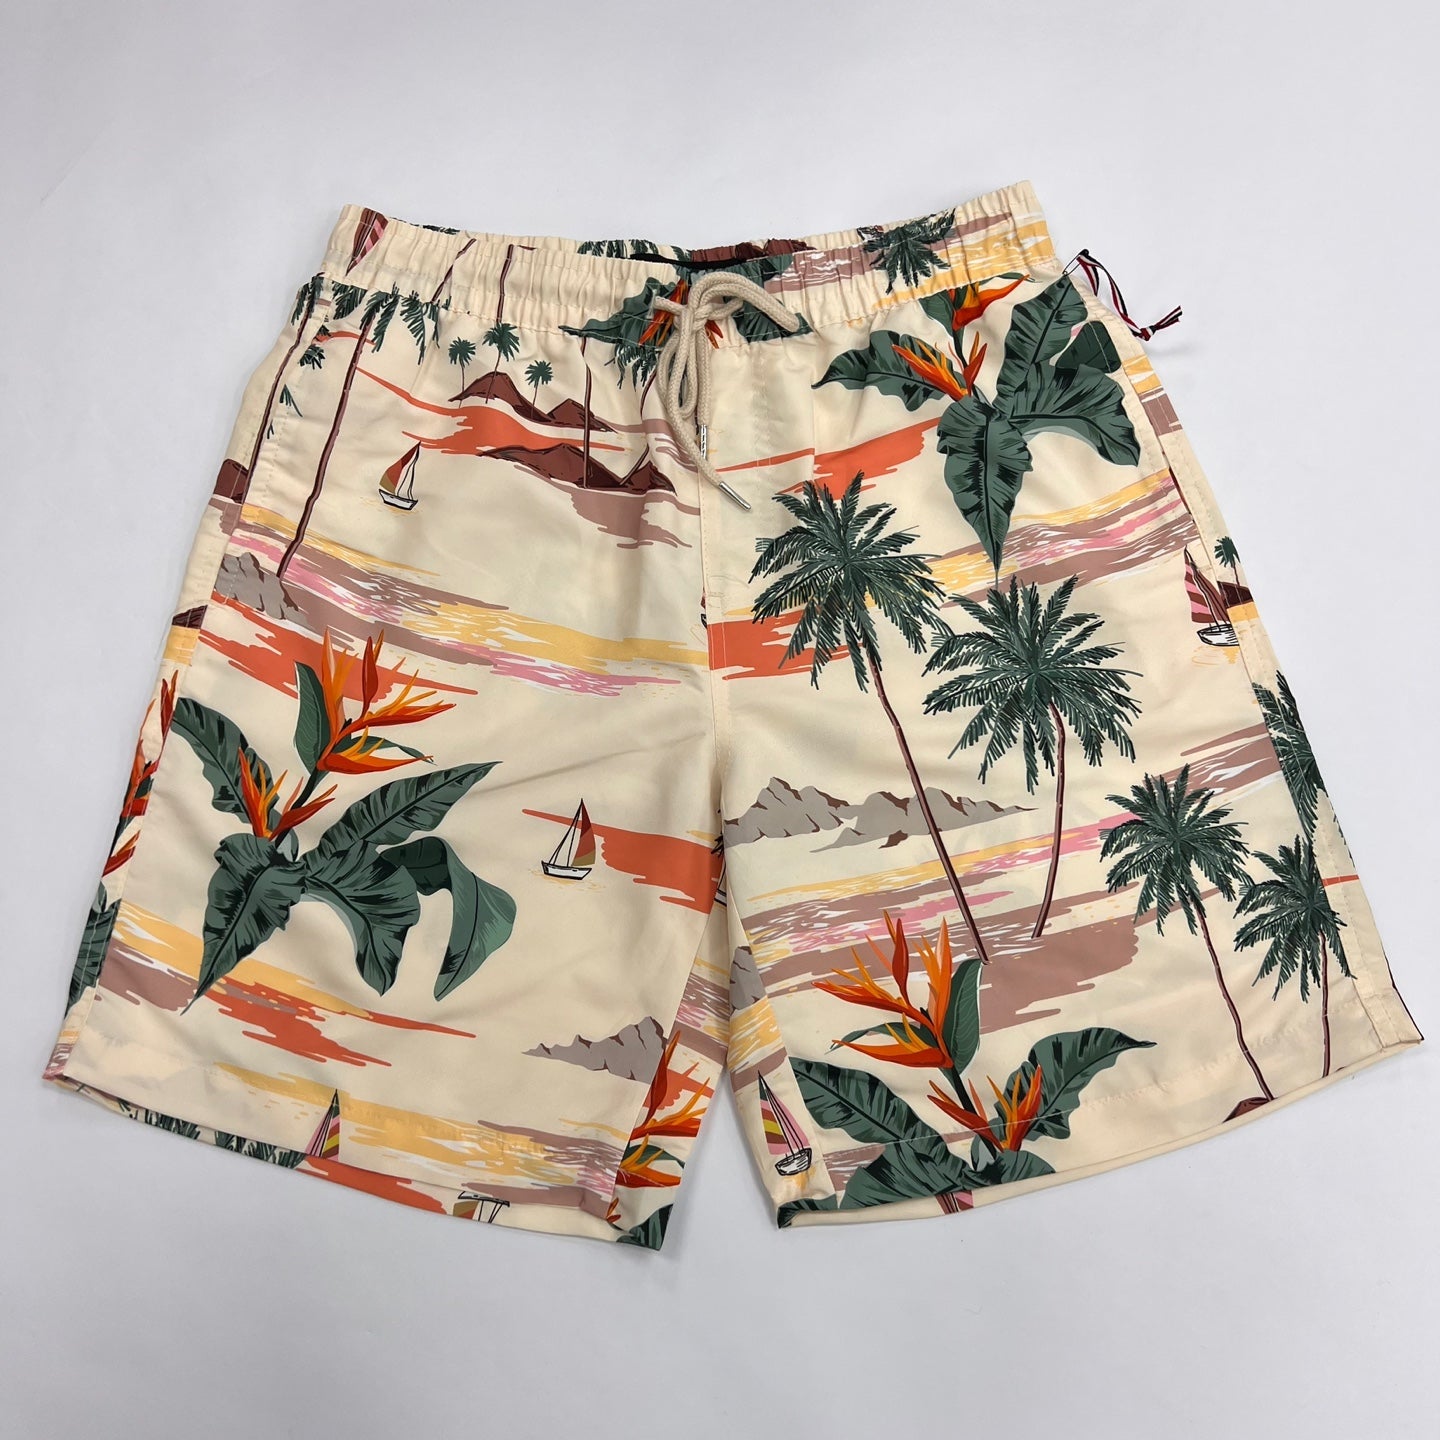 SWTICH Summer Vacation Graphic Print Shorts